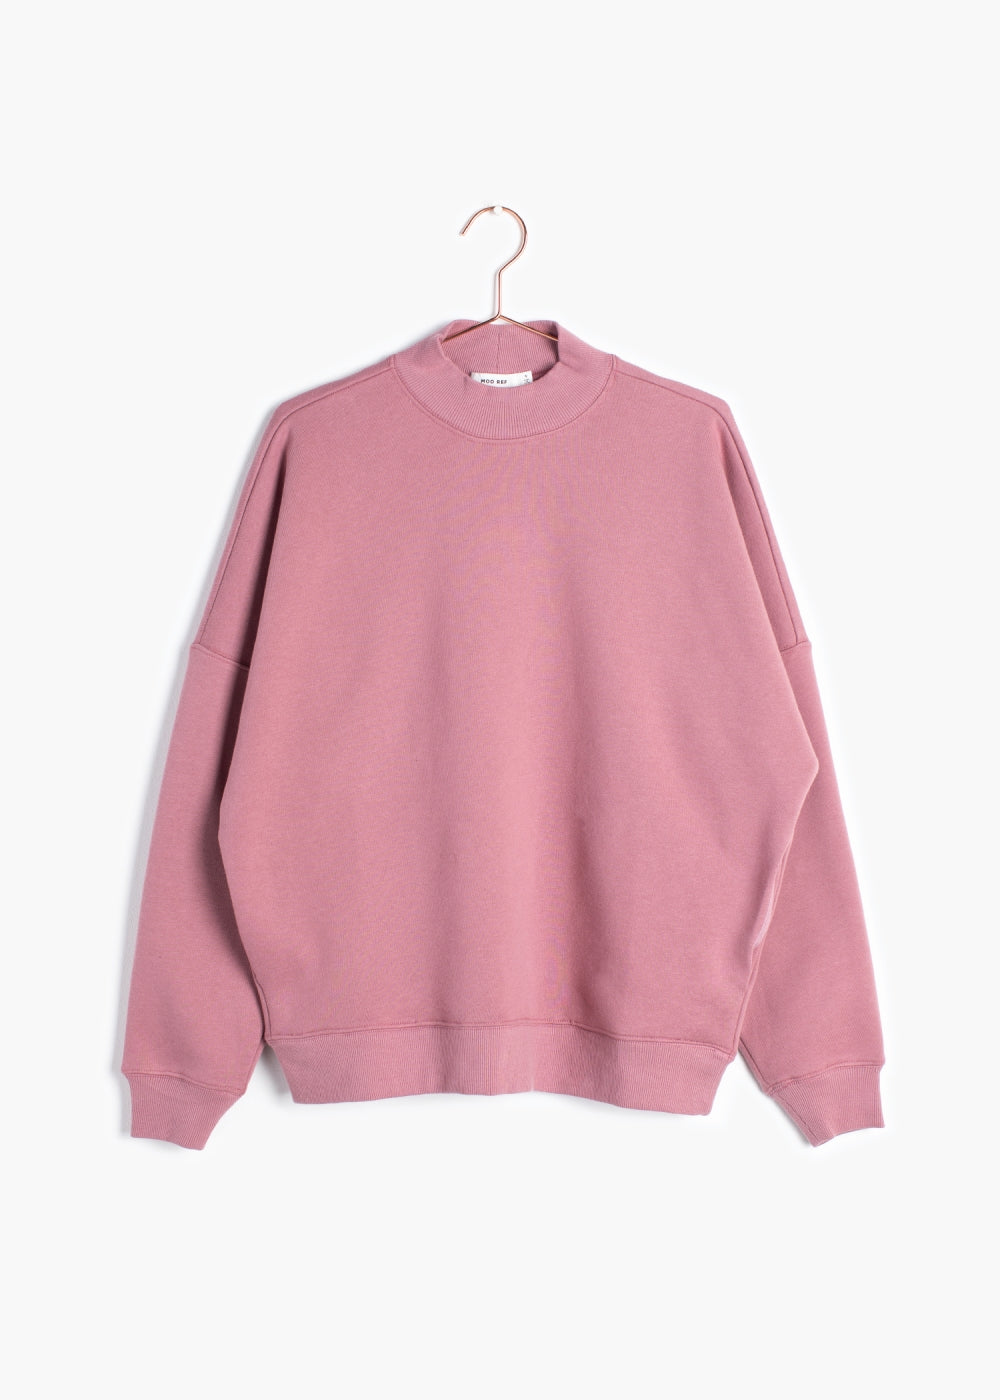 The Troy Sweater